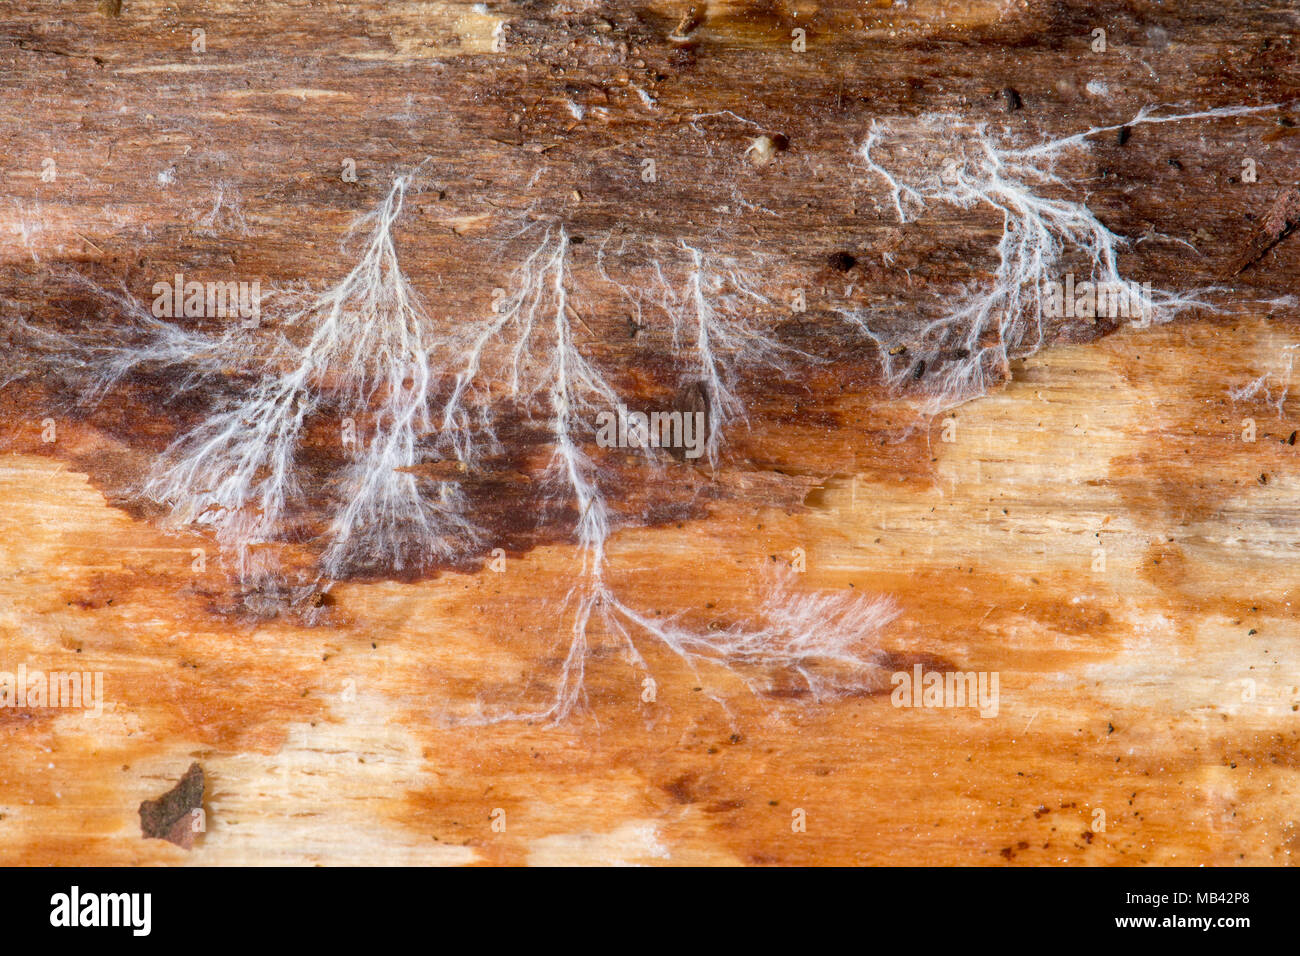 Fungal mycelium on dead wood. Mass branching of vegetative part of fungus, exposed by removing bark on dead coniferous log Stock Photo